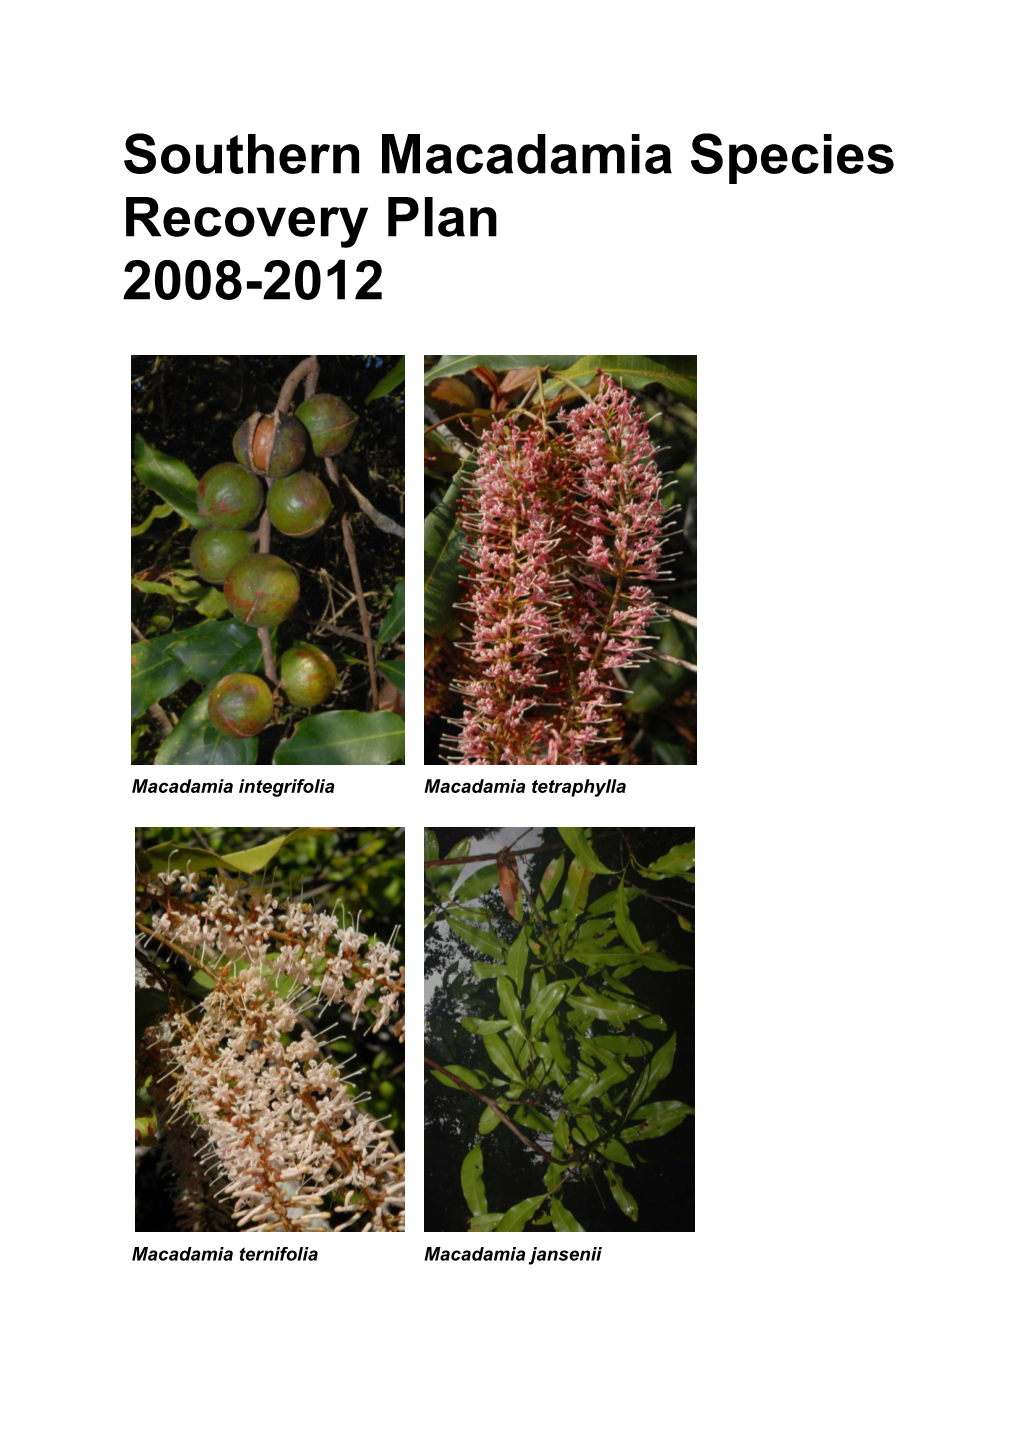 Southern Macadamia Species Recovery Plan 2008-2012